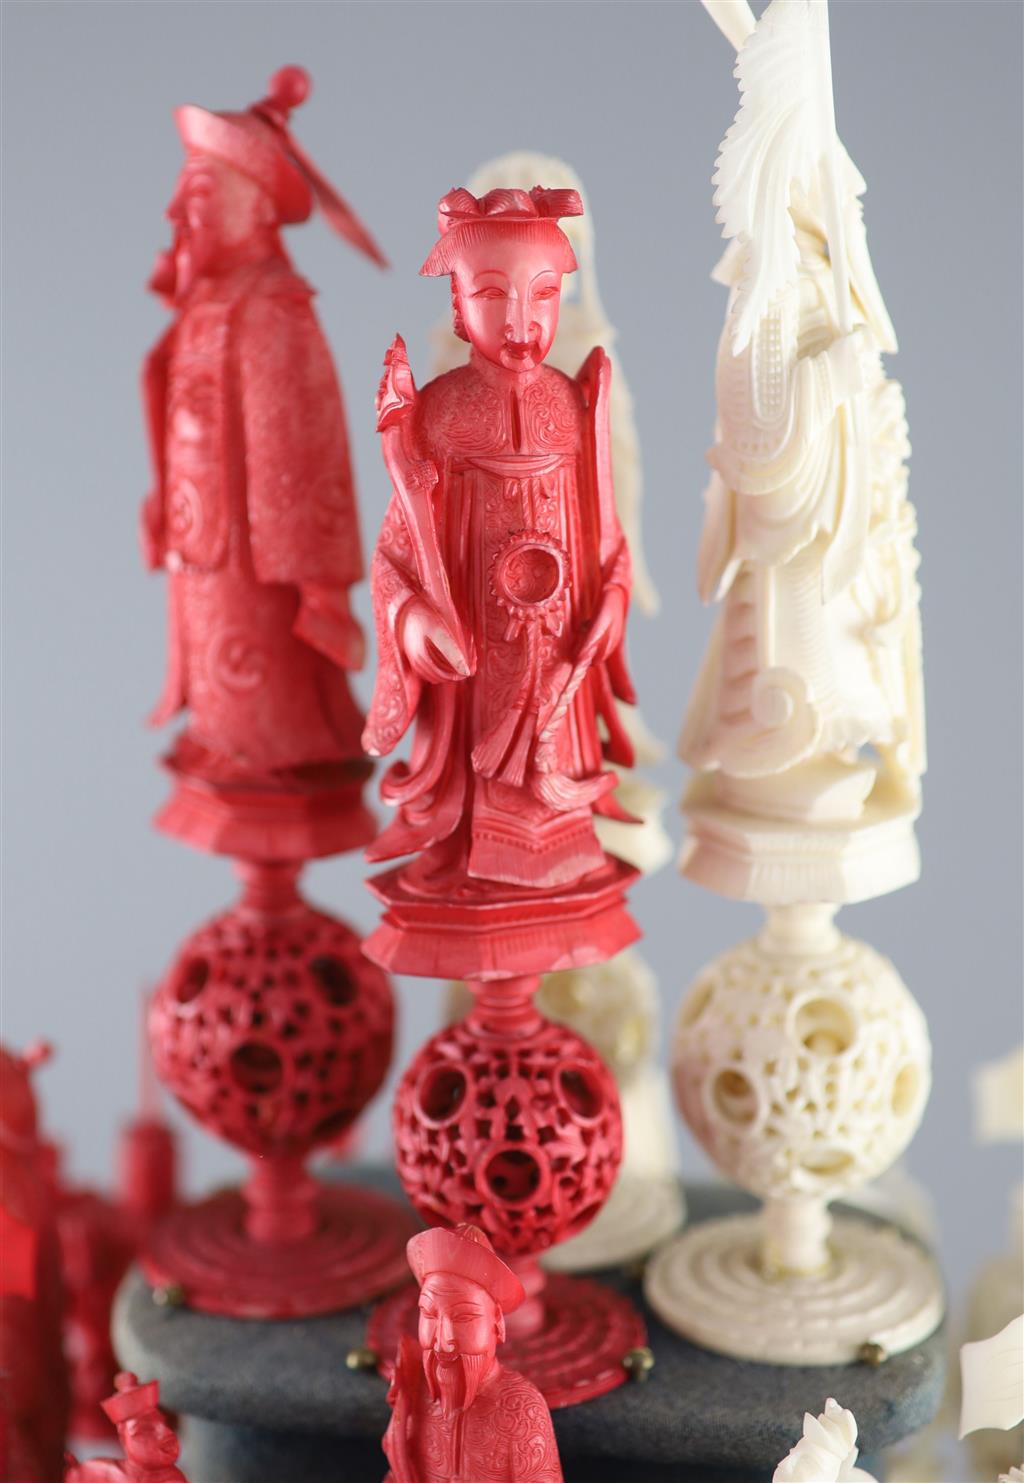 A set of 19th century Cantonese carved and red stained ivory chess pieces under dome, white king 20cm high